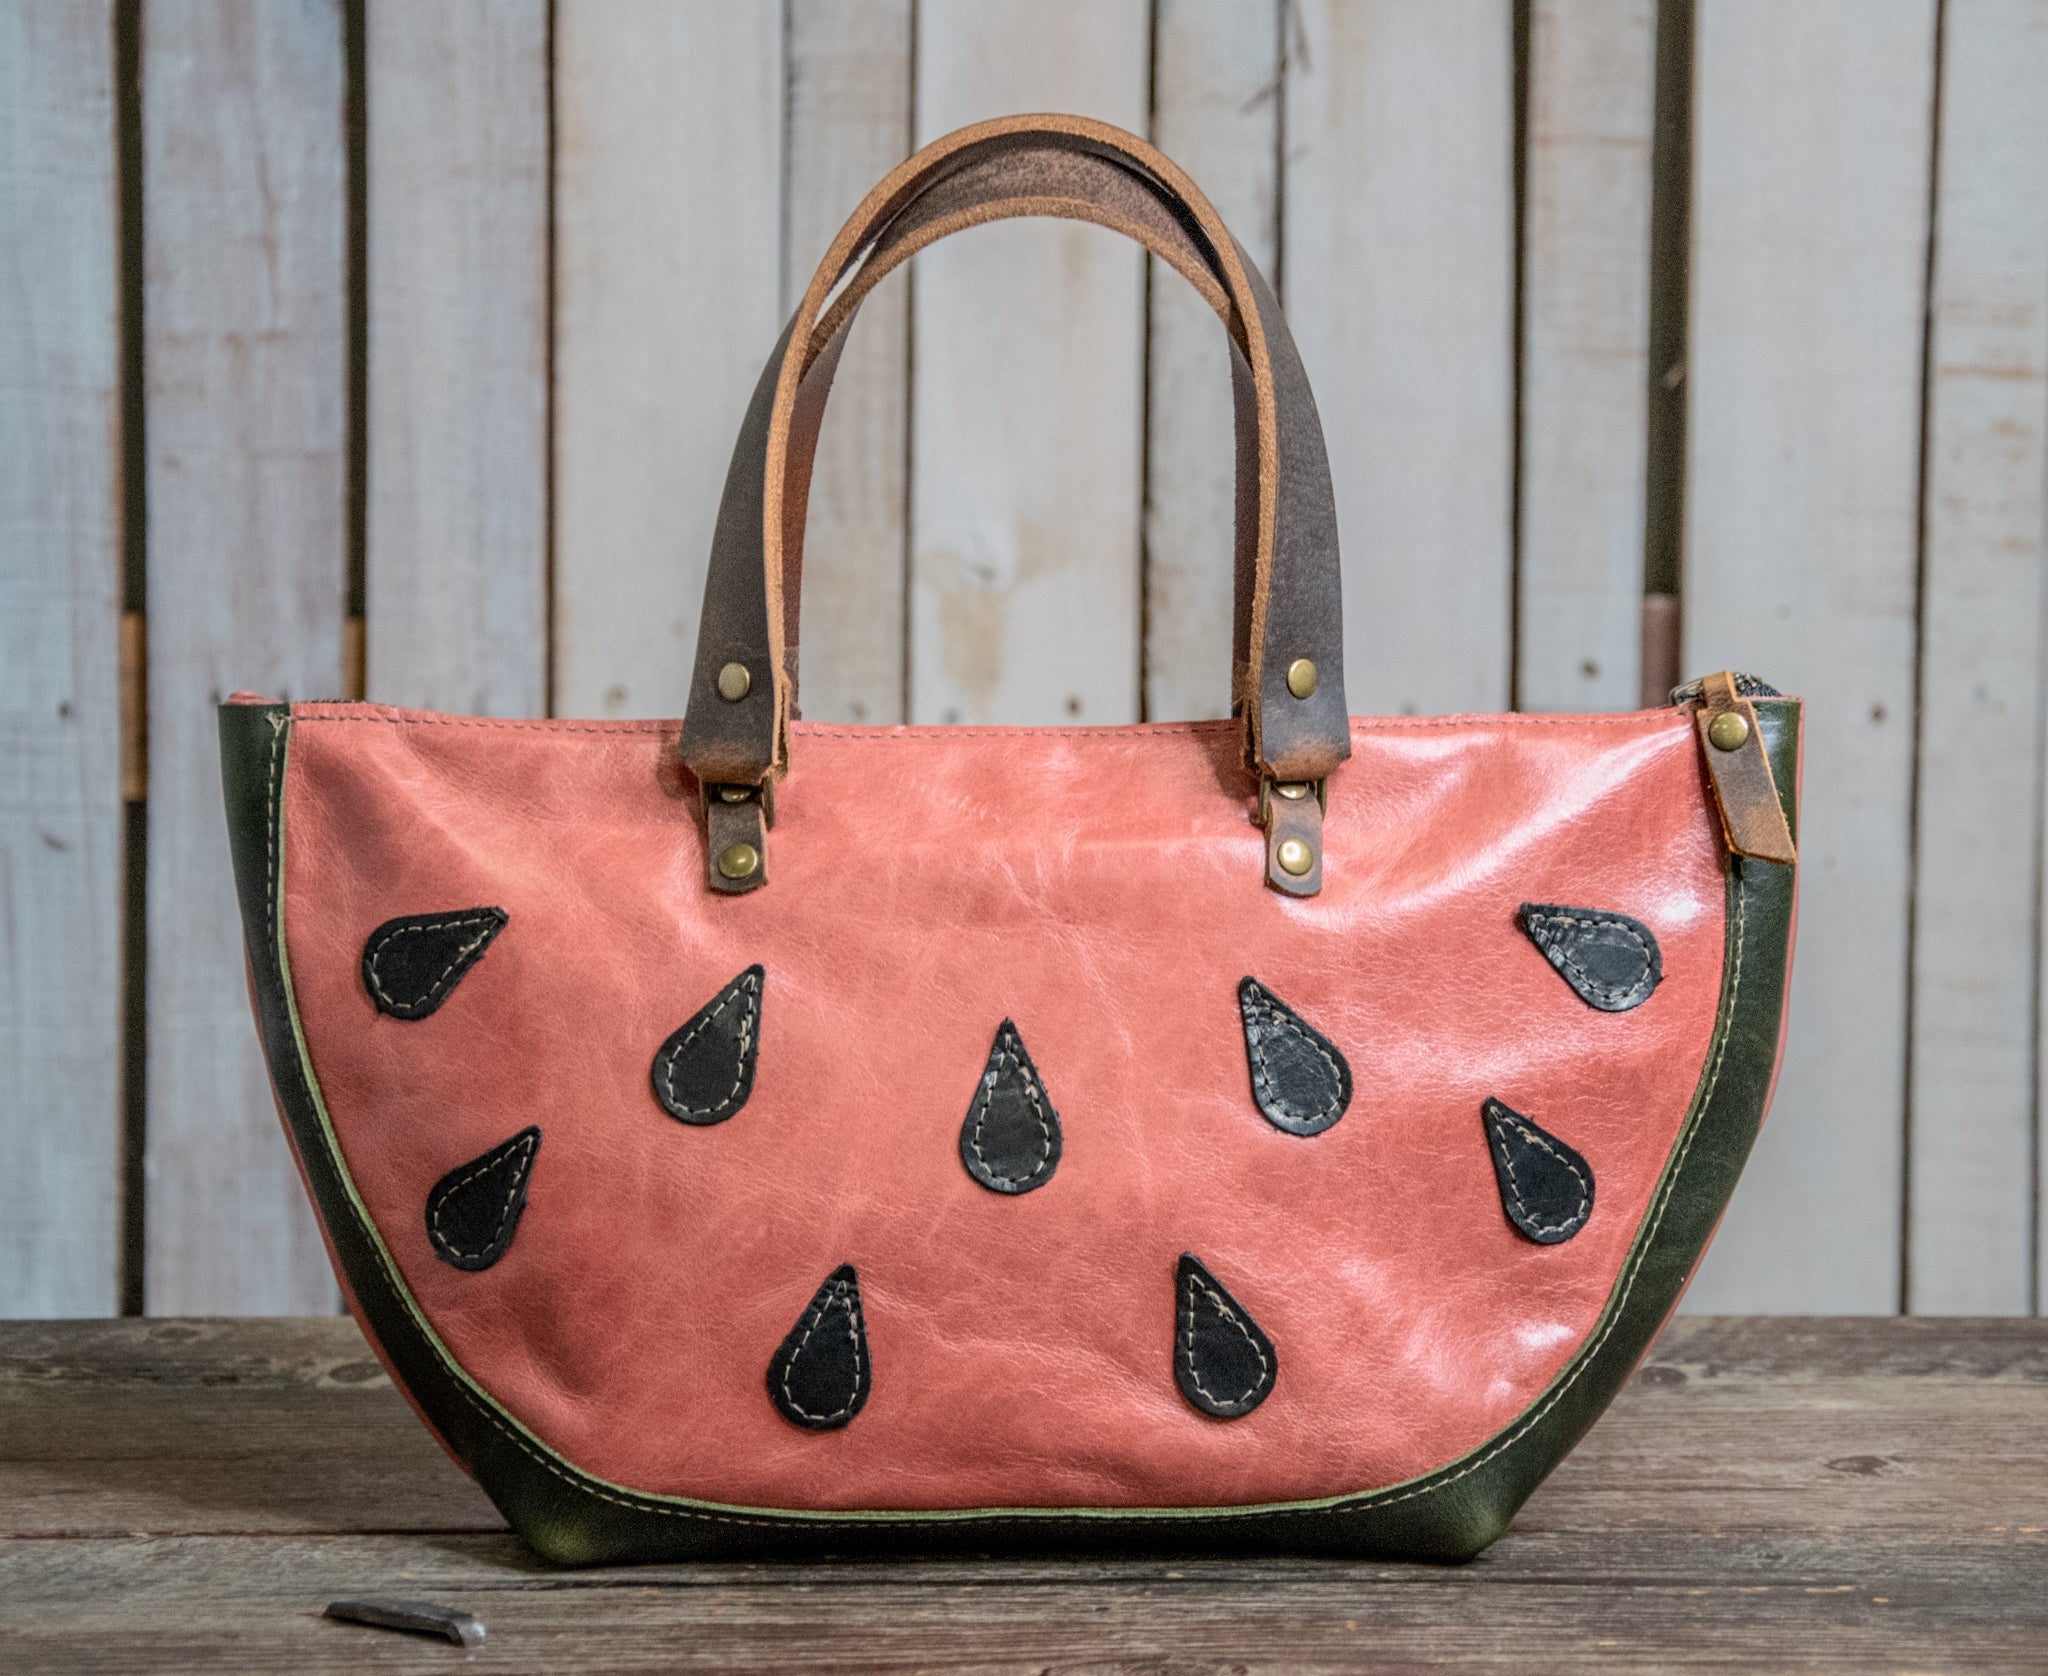 LIMITED | ONLY 5 AVAILABLE | Handmade Leather Tote Bag | SMALL Bowler | Watermelon Bag